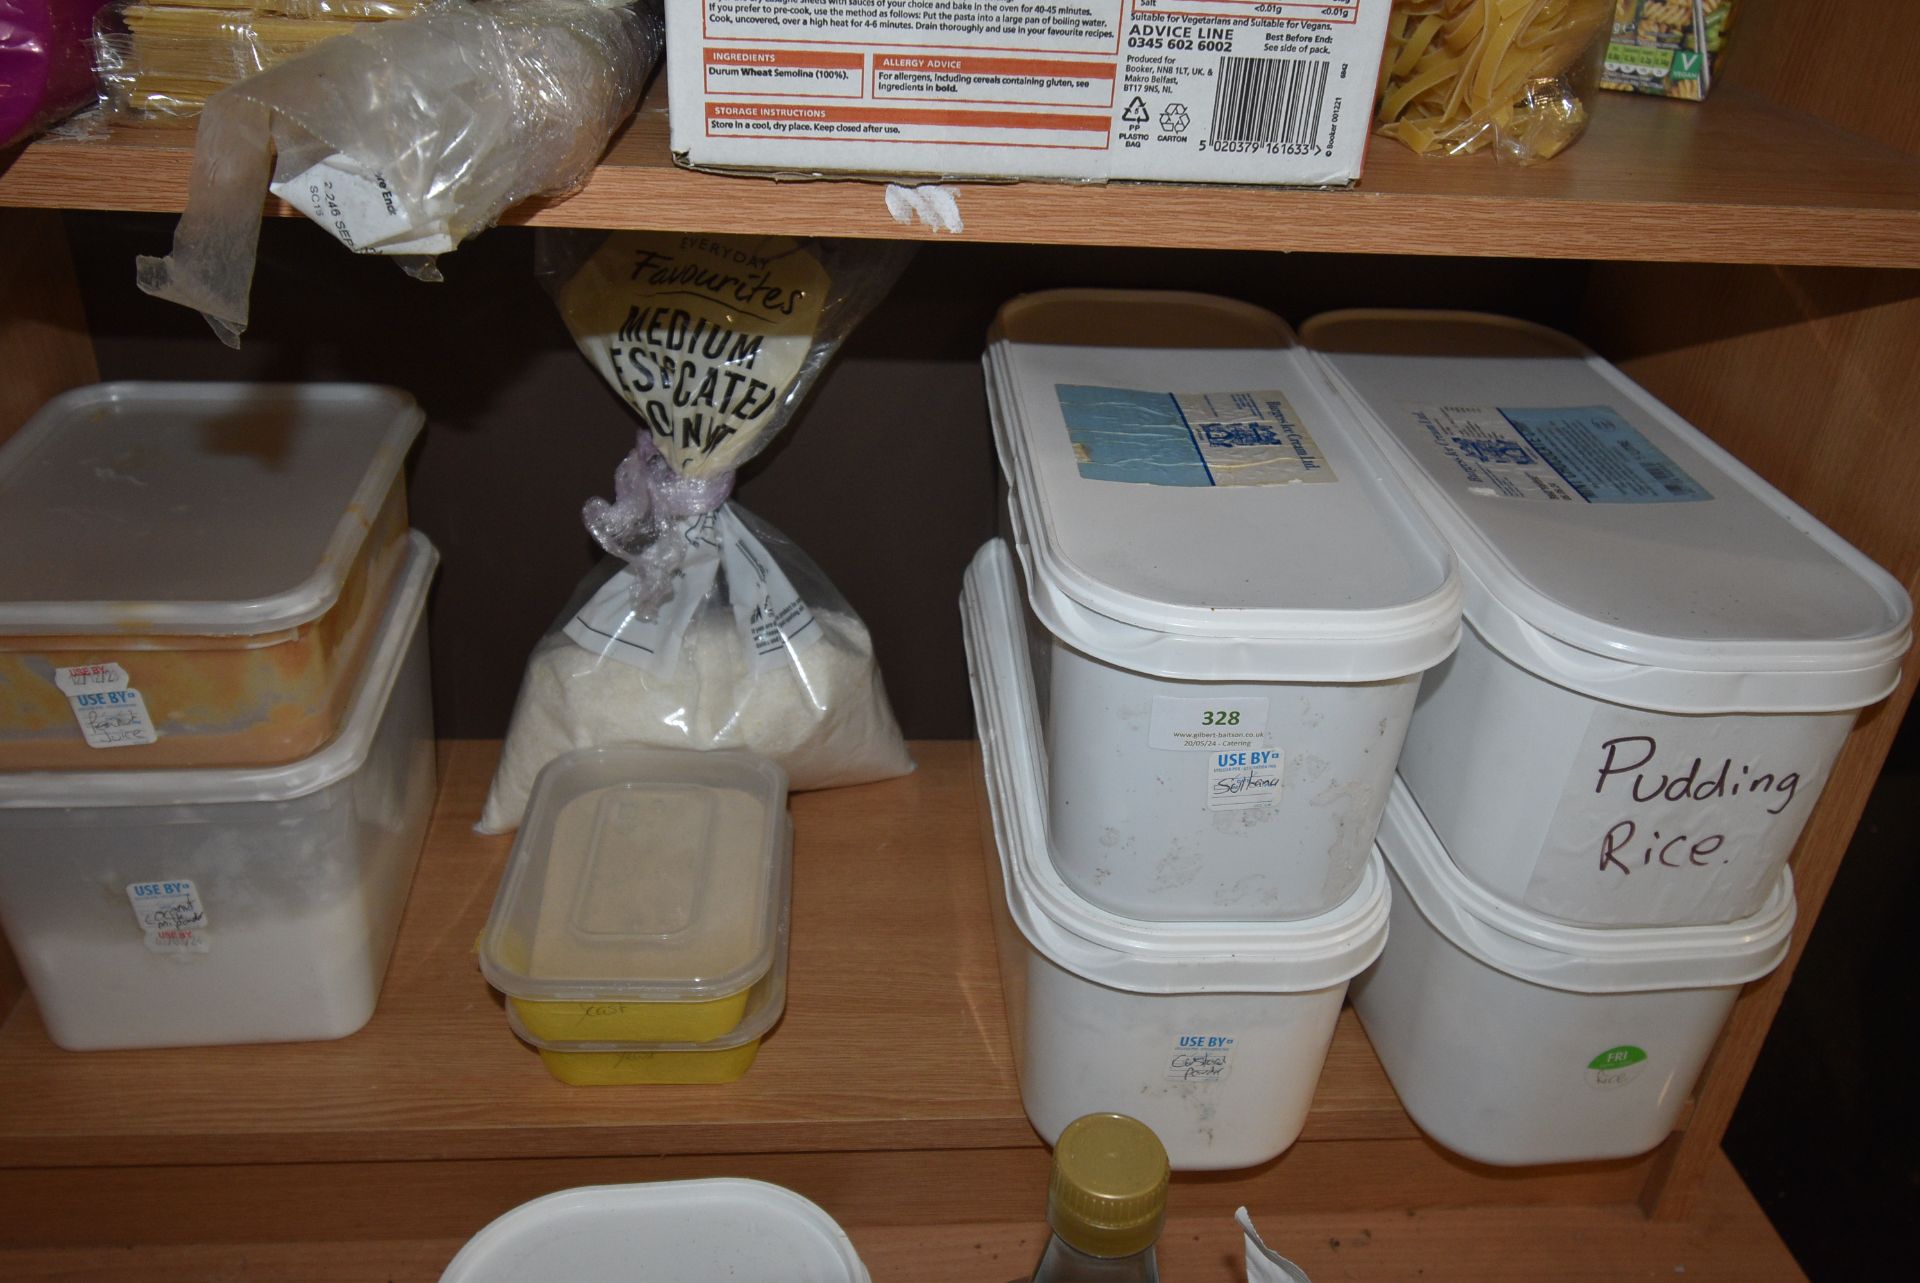 Contents of Shelf to Include Coconut Powder, Yeast, Pudding Rice, etc.